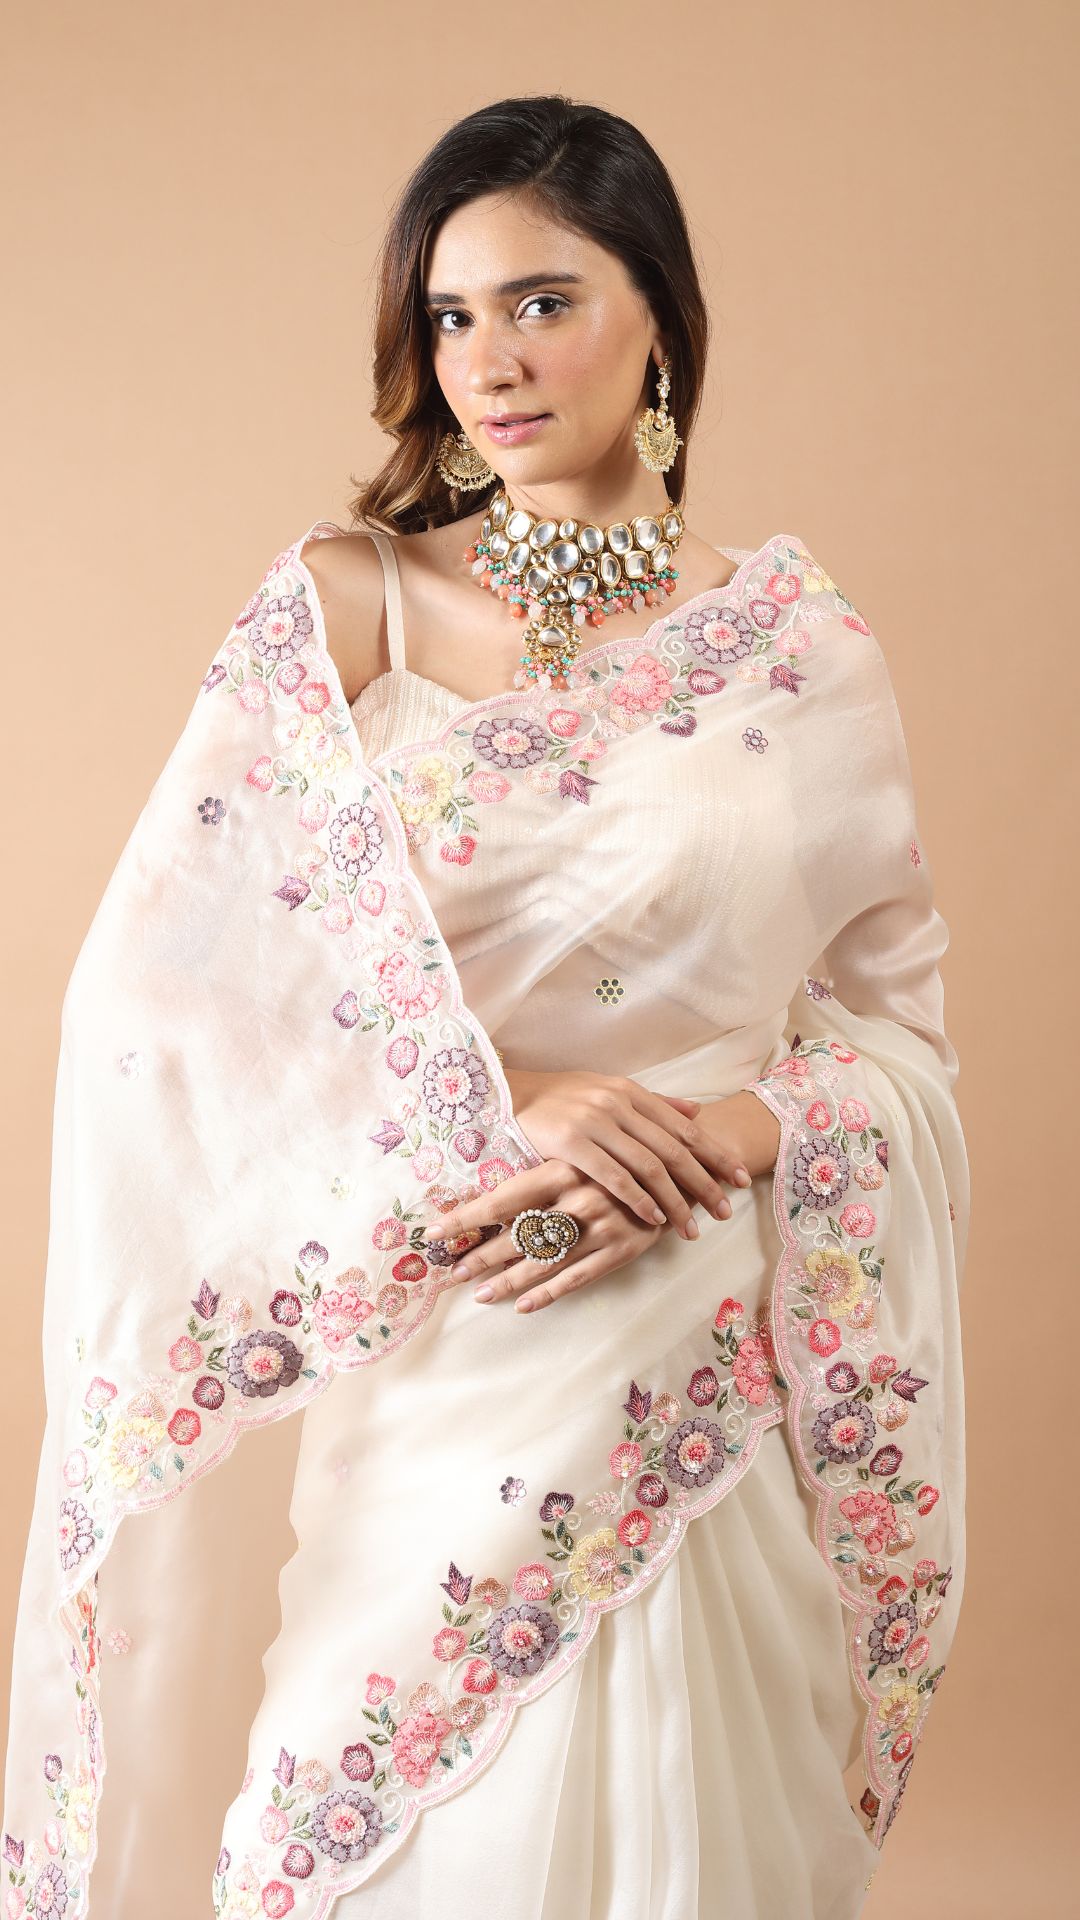 Inaya Pearl White Threadwork and Sequins Detailed Saree